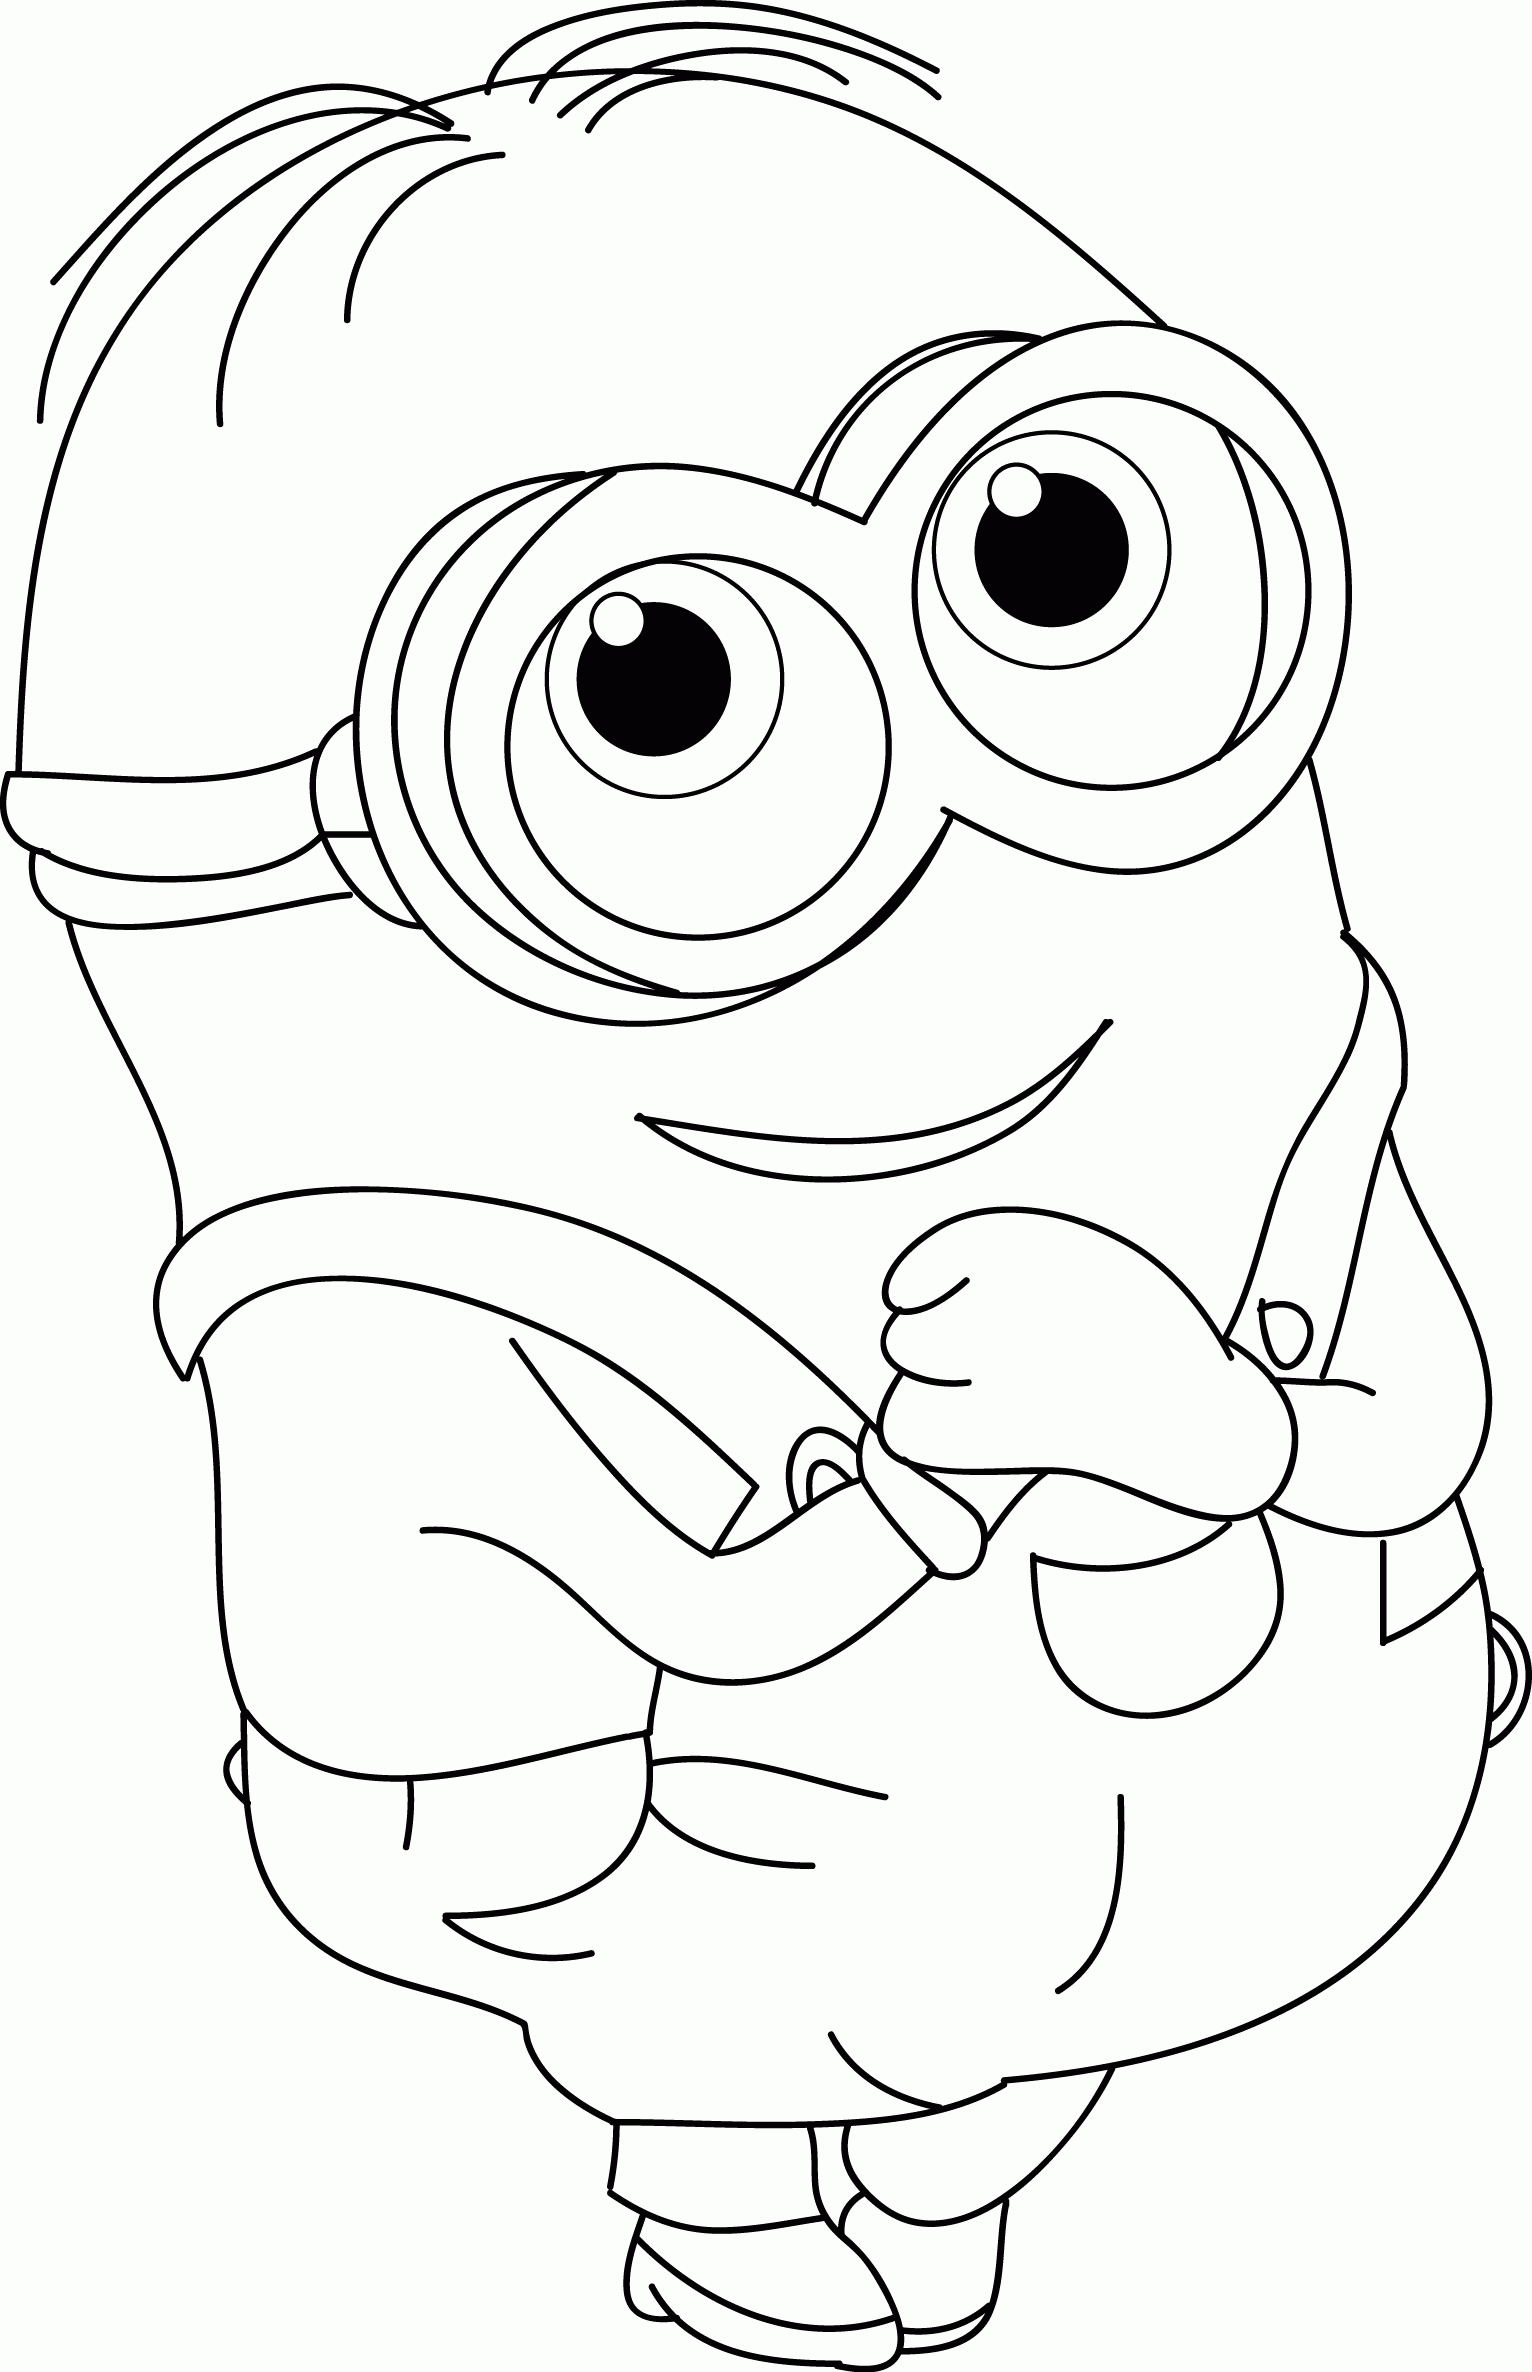 Minion S Very Cute Coloring Page | 